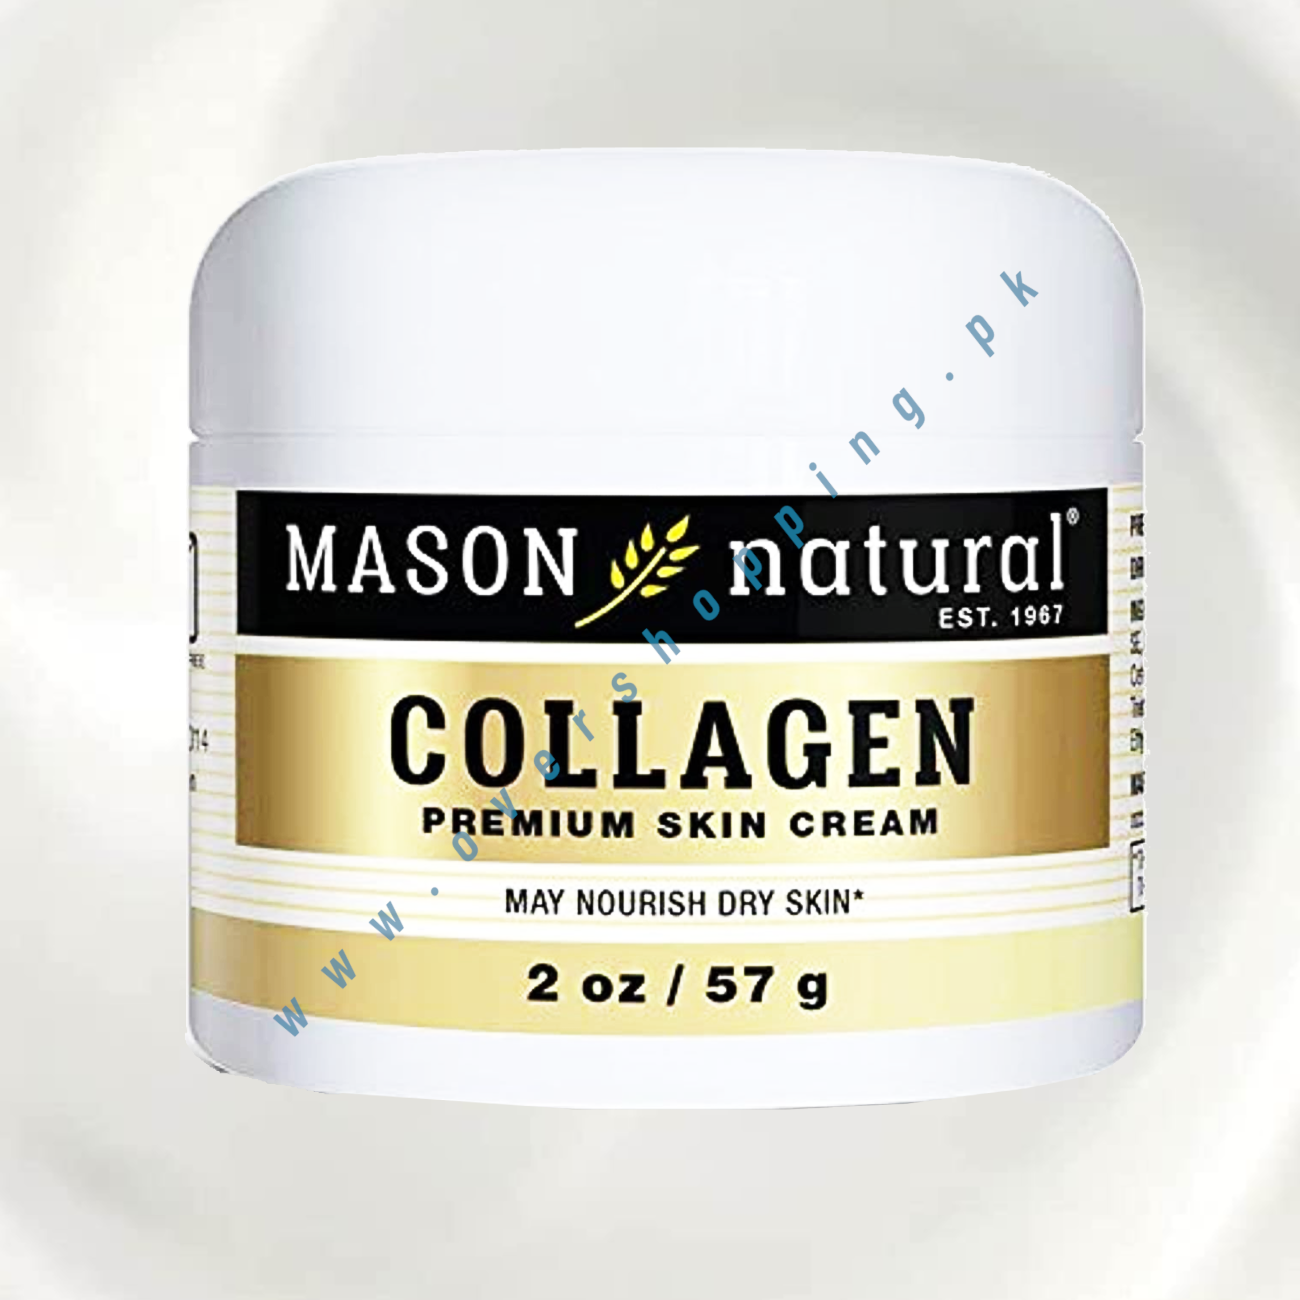 Collagen Beauty Cream Made with 100% Pure Collagen - 2 Oz (57g)